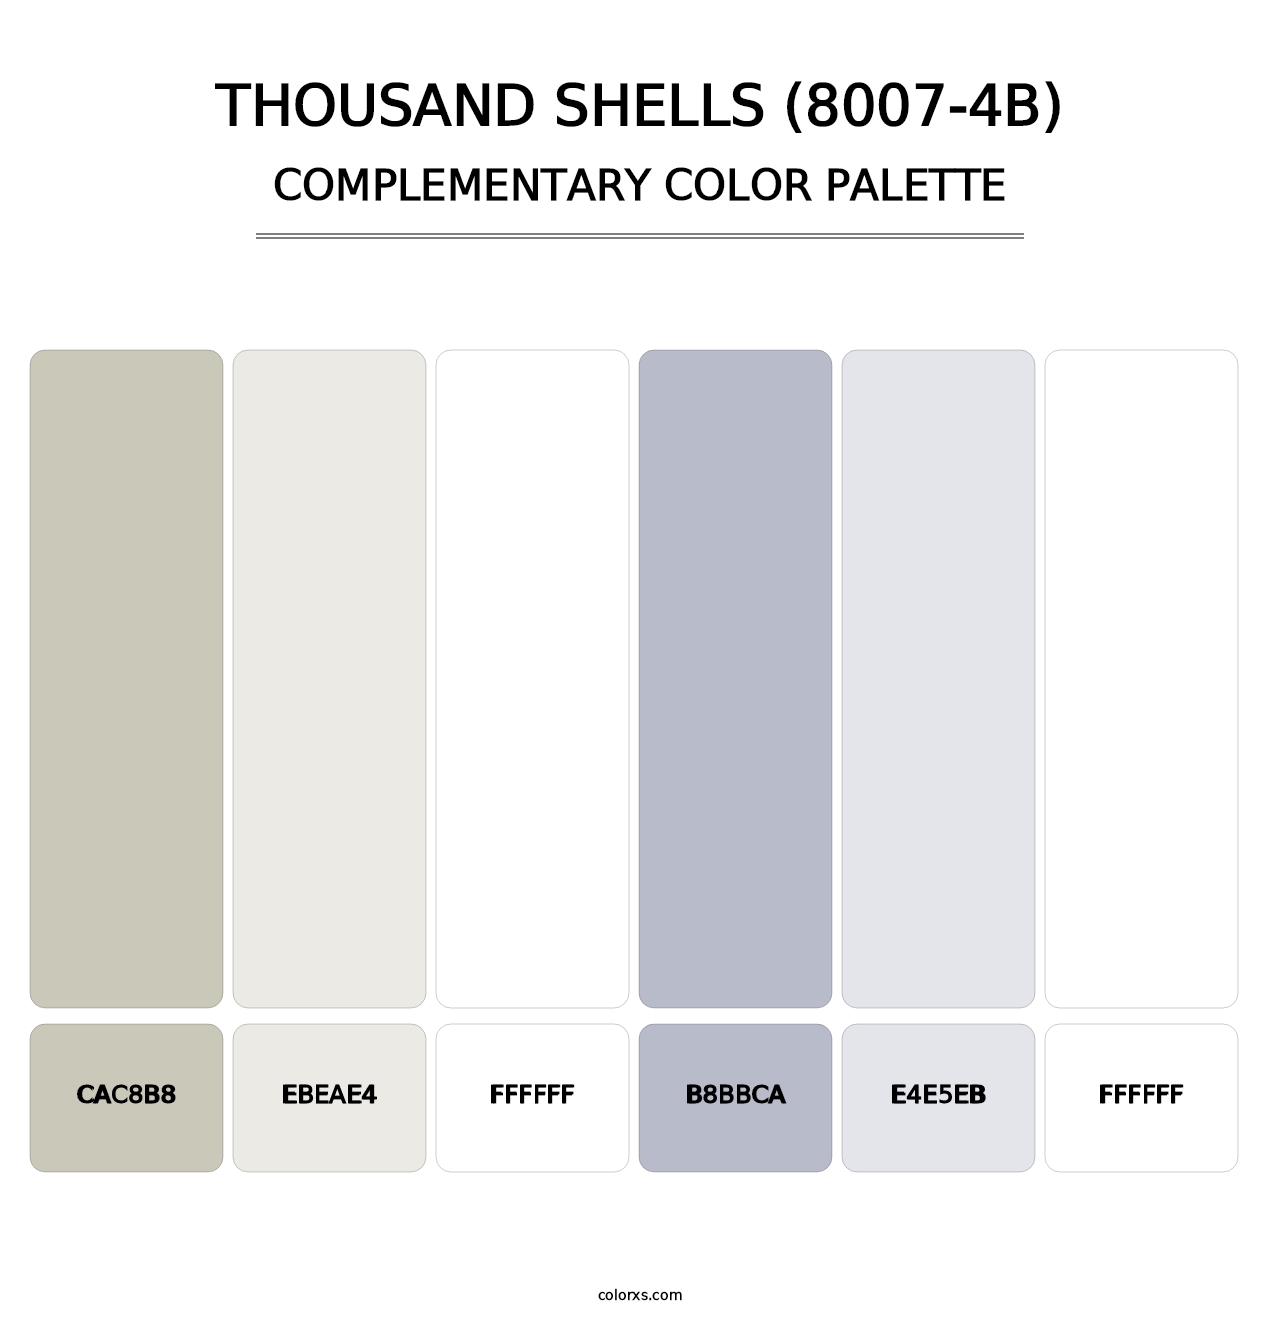 Thousand Shells (8007-4B) - Complementary Color Palette